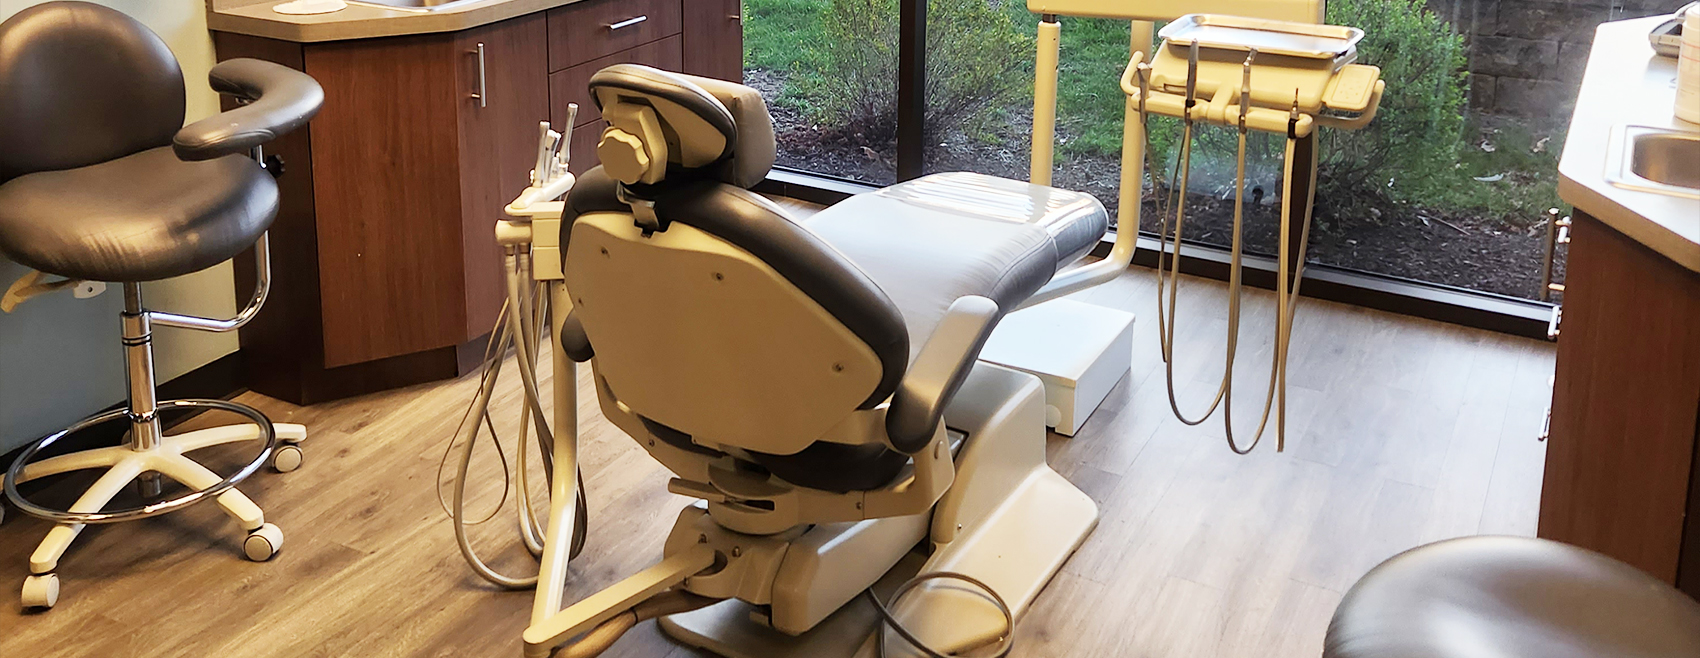 picture of a dental treatment room